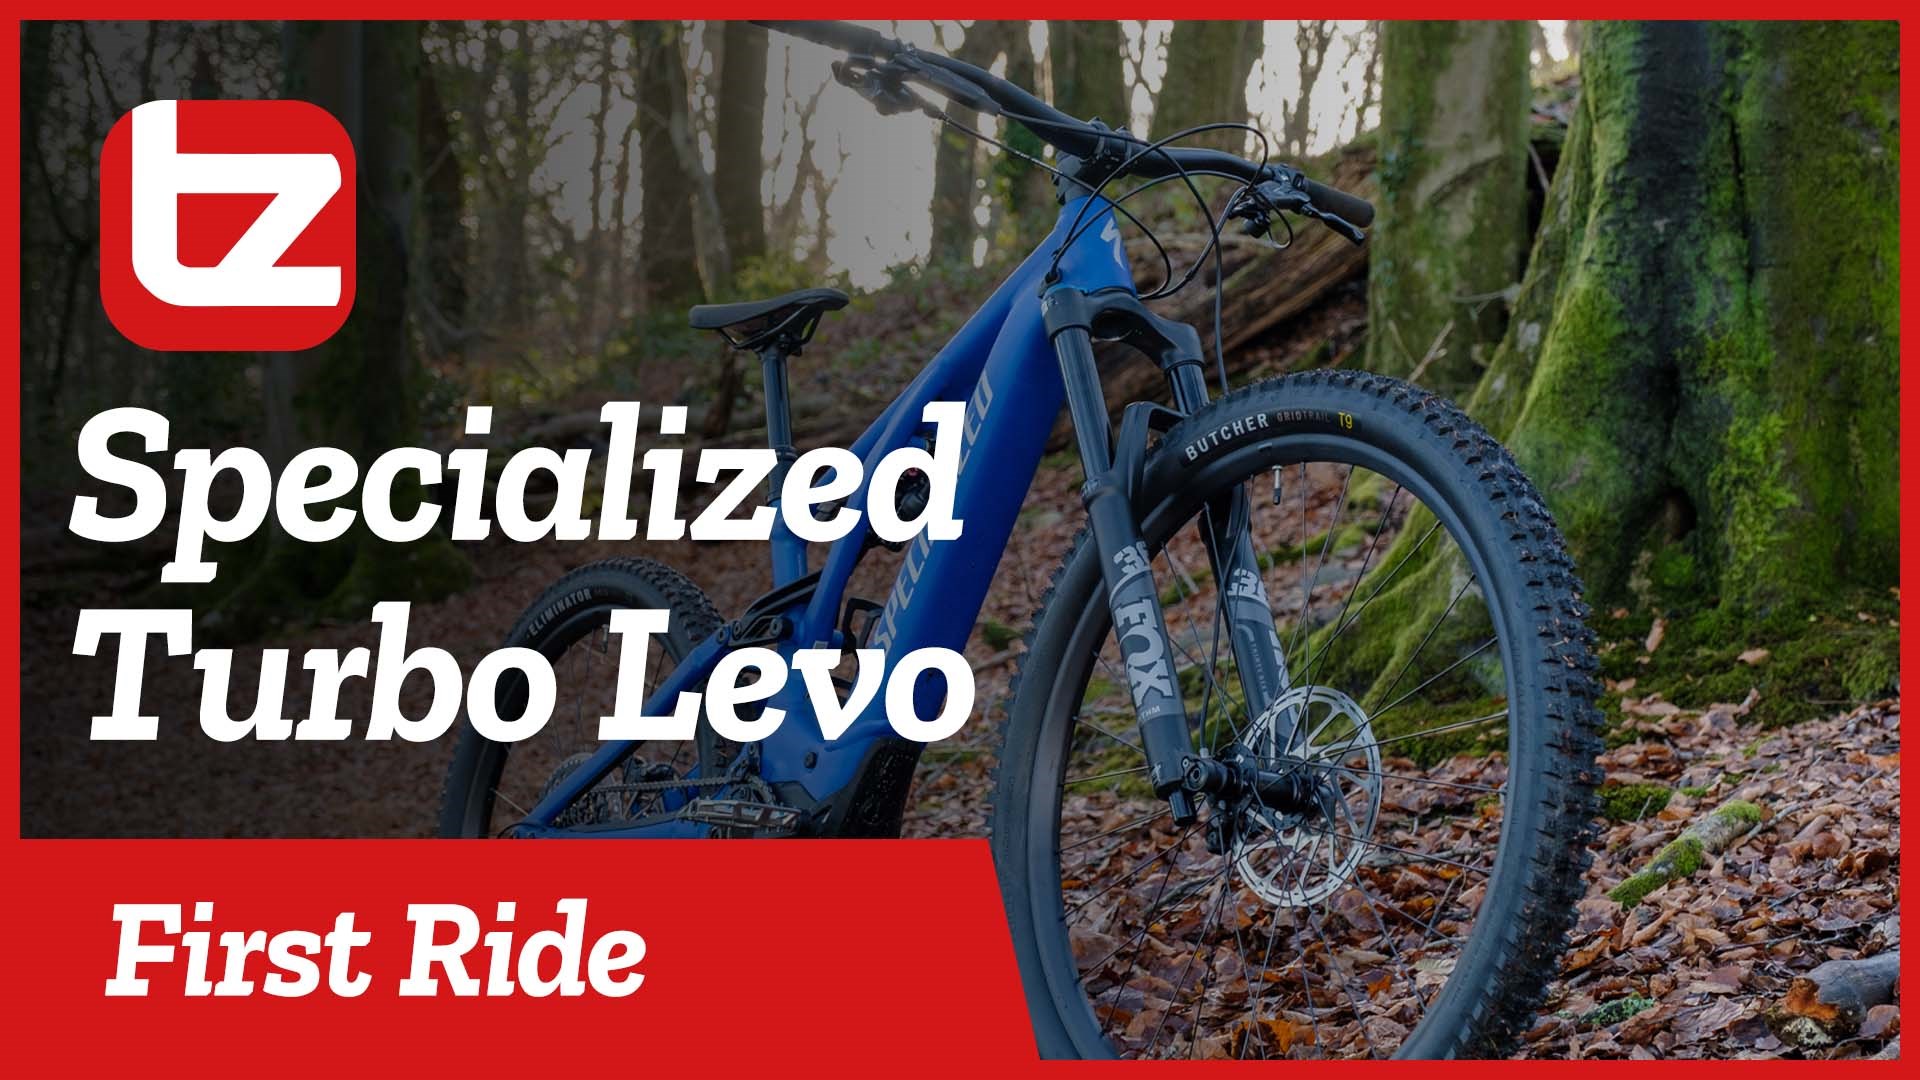 We find out if the new Turbo Levo has unbelievable power | Specialized Turbo Levo First Ride Review